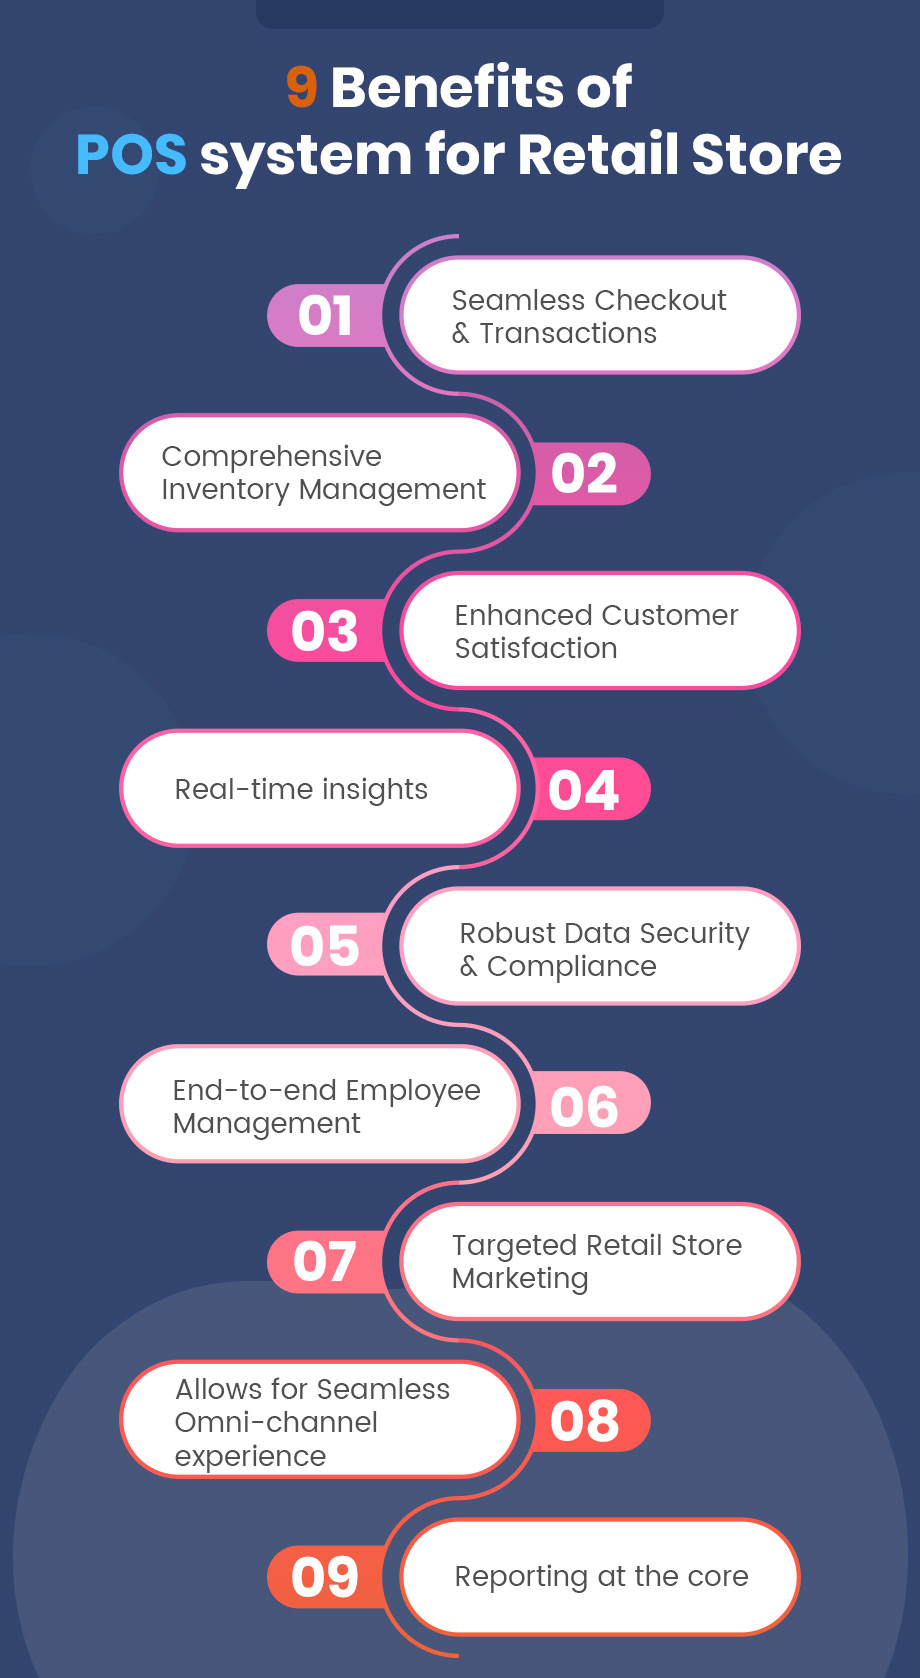 9 Benefits of POS system for Retail Store